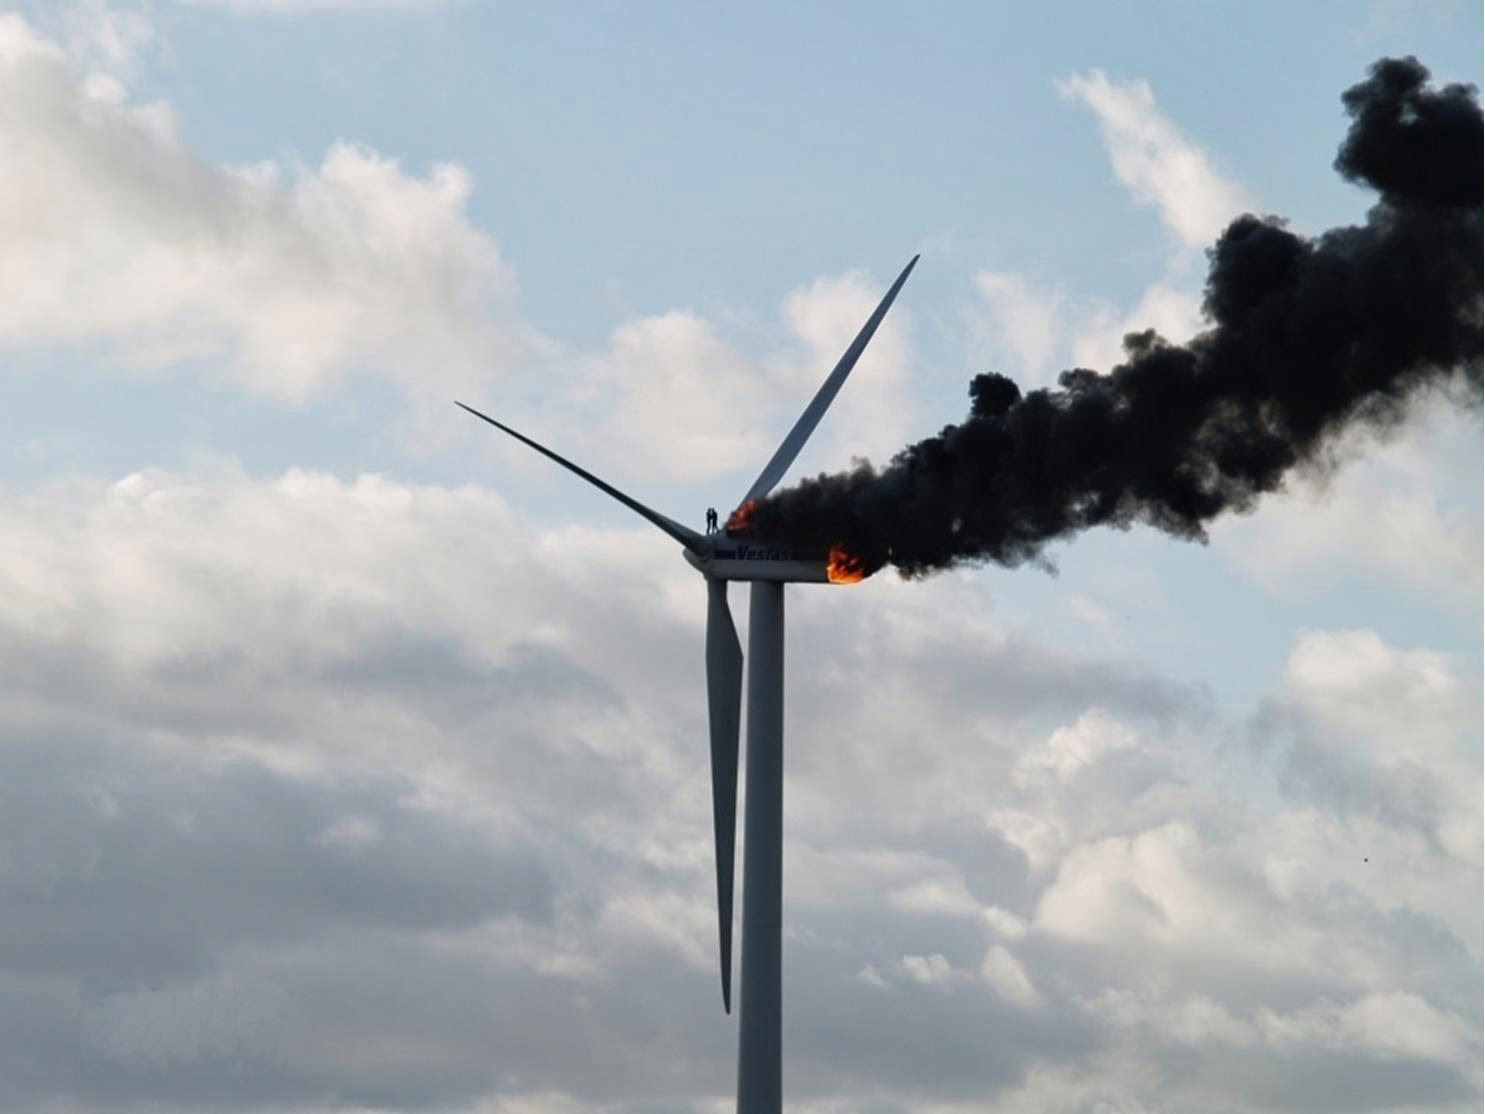 Two engineers share one last hug before certain death after being trapped on a burning wind turbine.